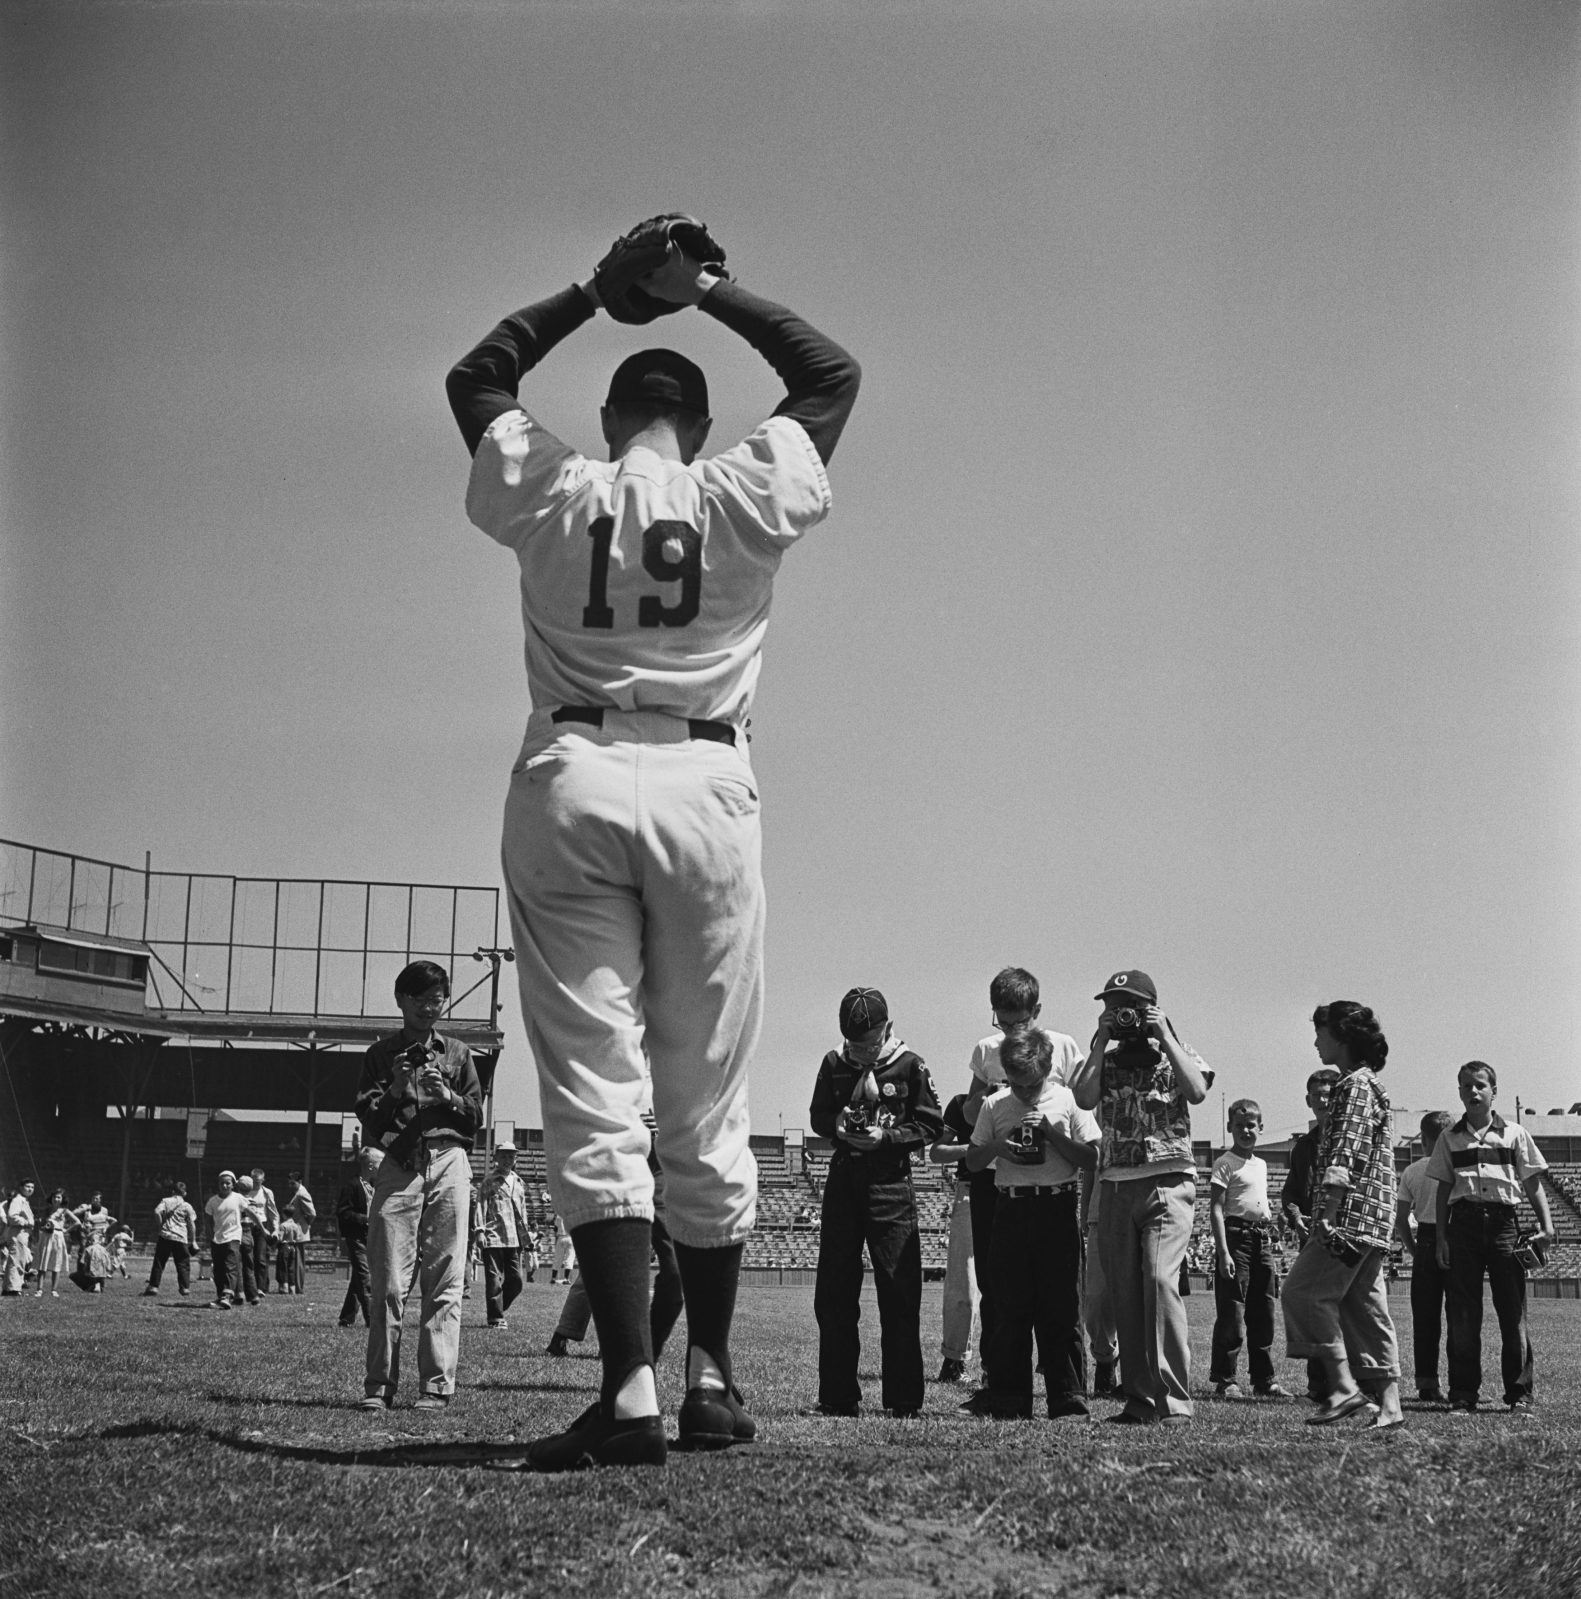 Kids photograph a pitcher for the Pacific Coast League's Oakland Acorns in 1952.